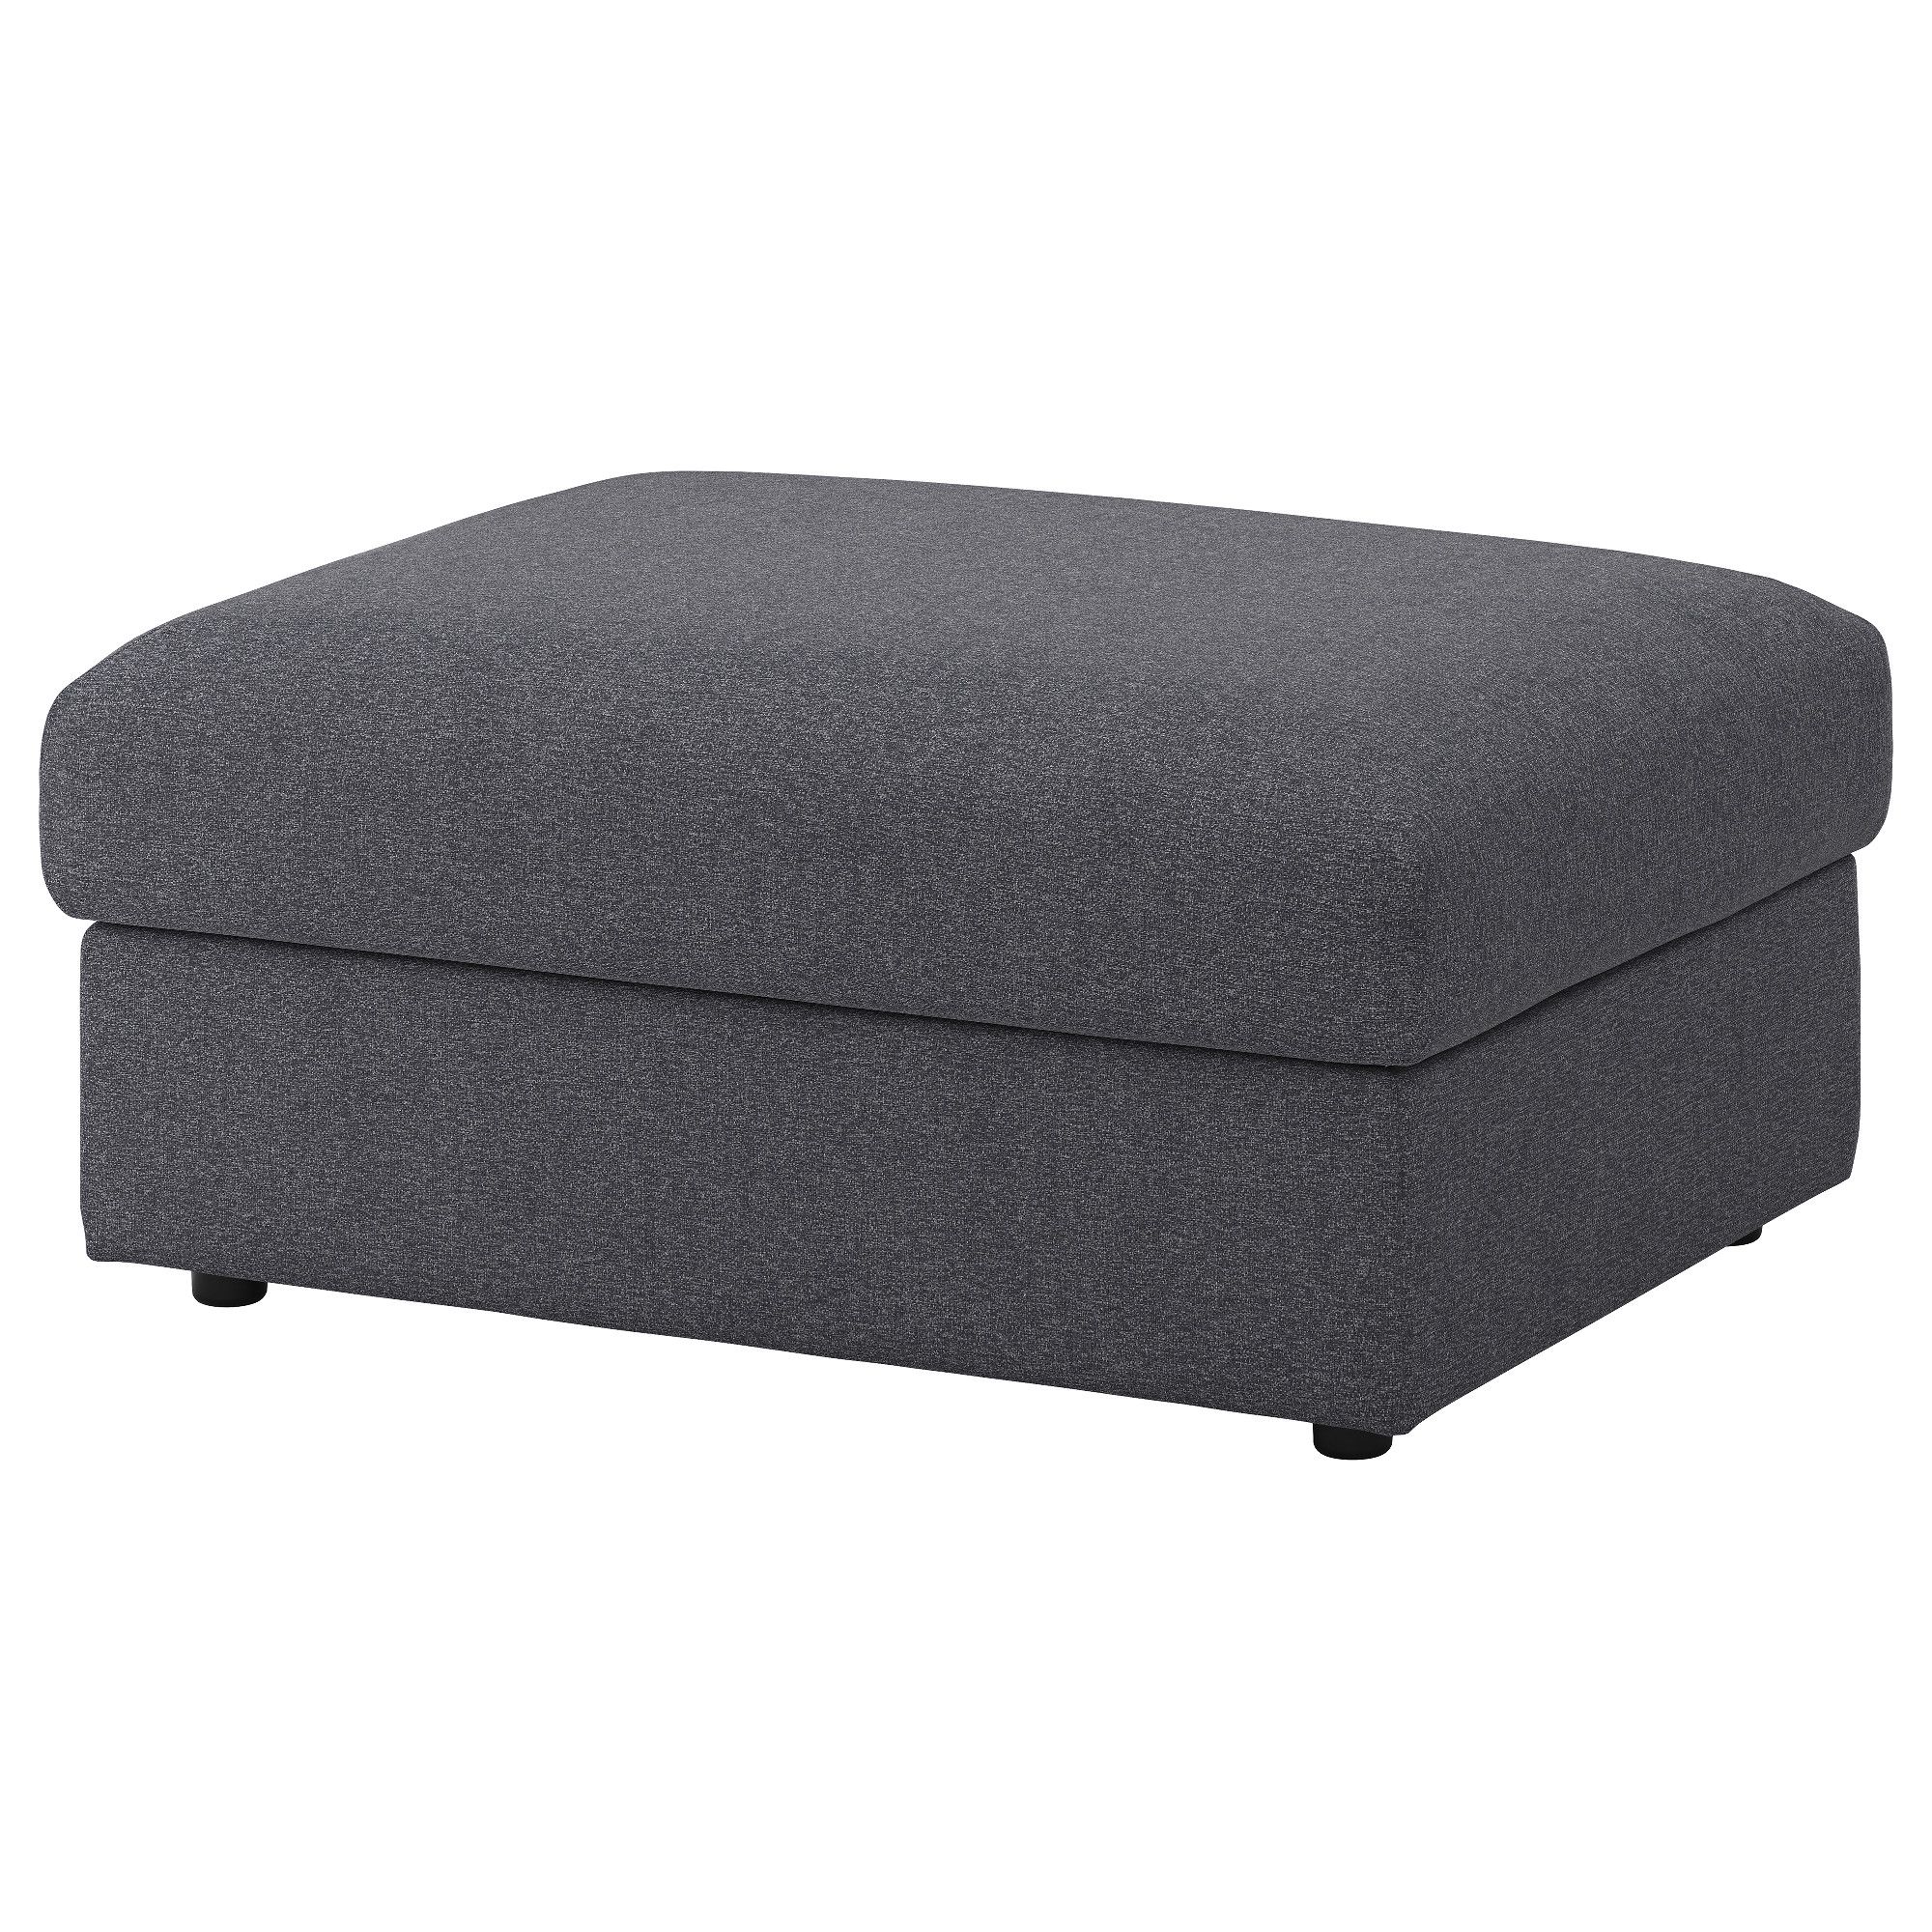 Vimle Footstool With Storage Gunnared Medium Grey Ikea For Ikea Footstools And Pouffes (View 3 of 15)